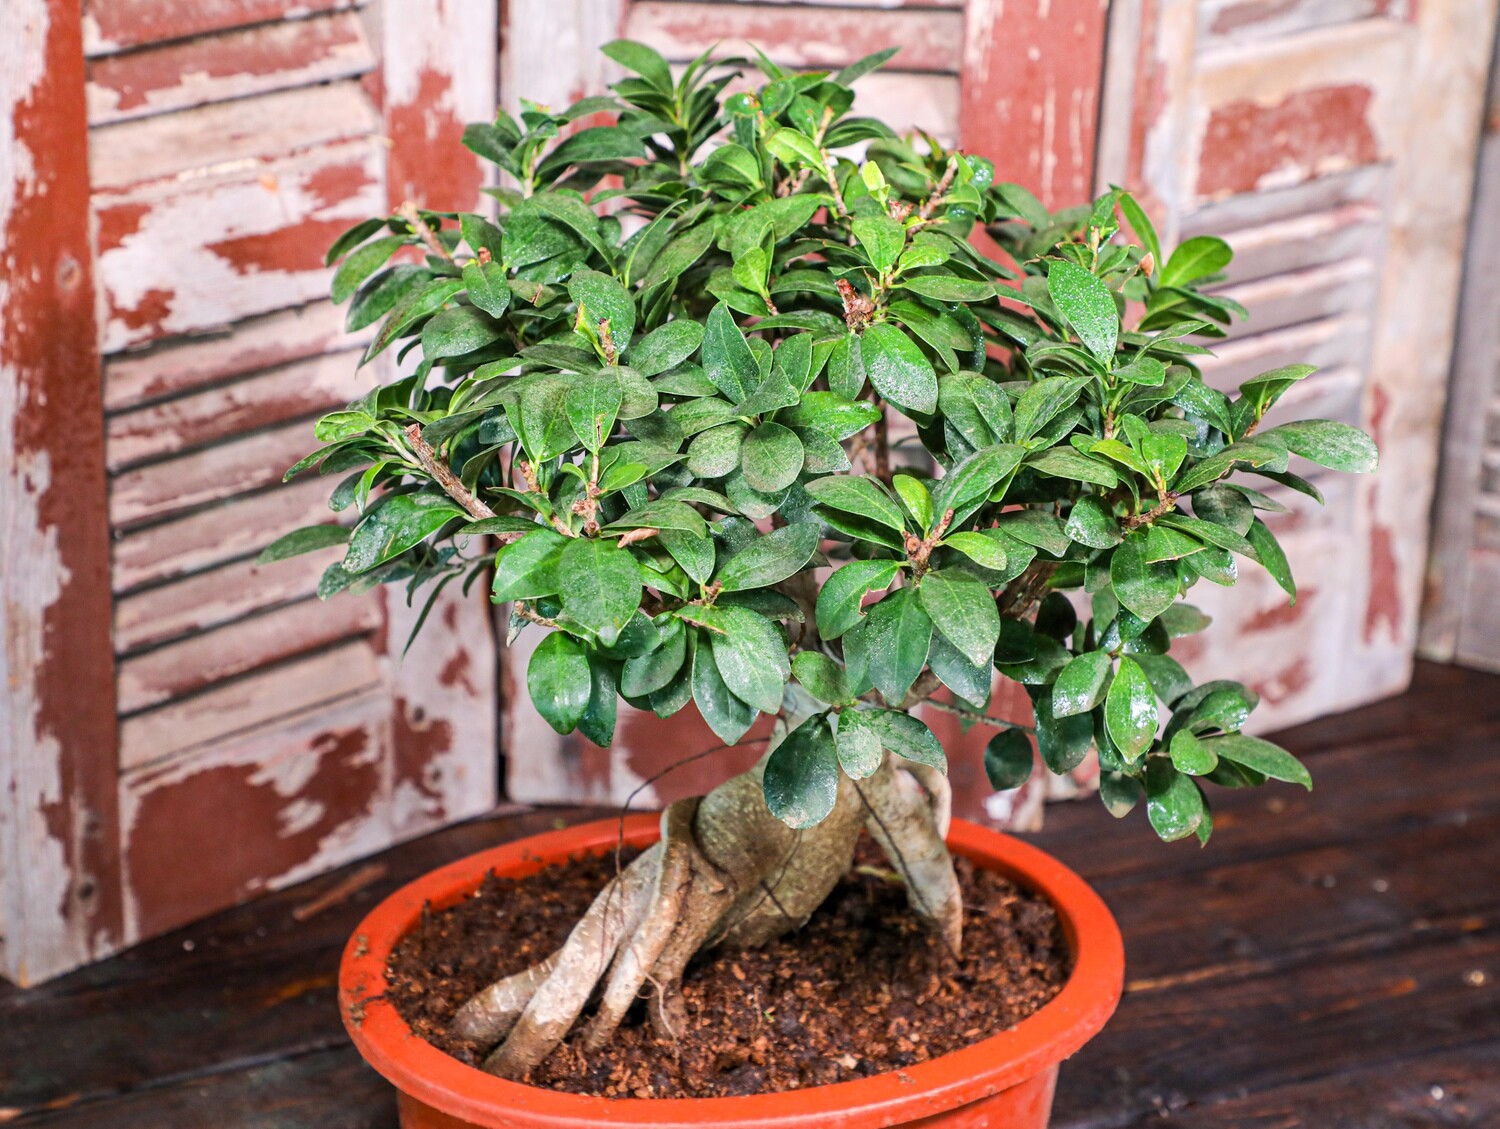 Bonsai ficus (Plant) - Nature by Marc Beyrouthy